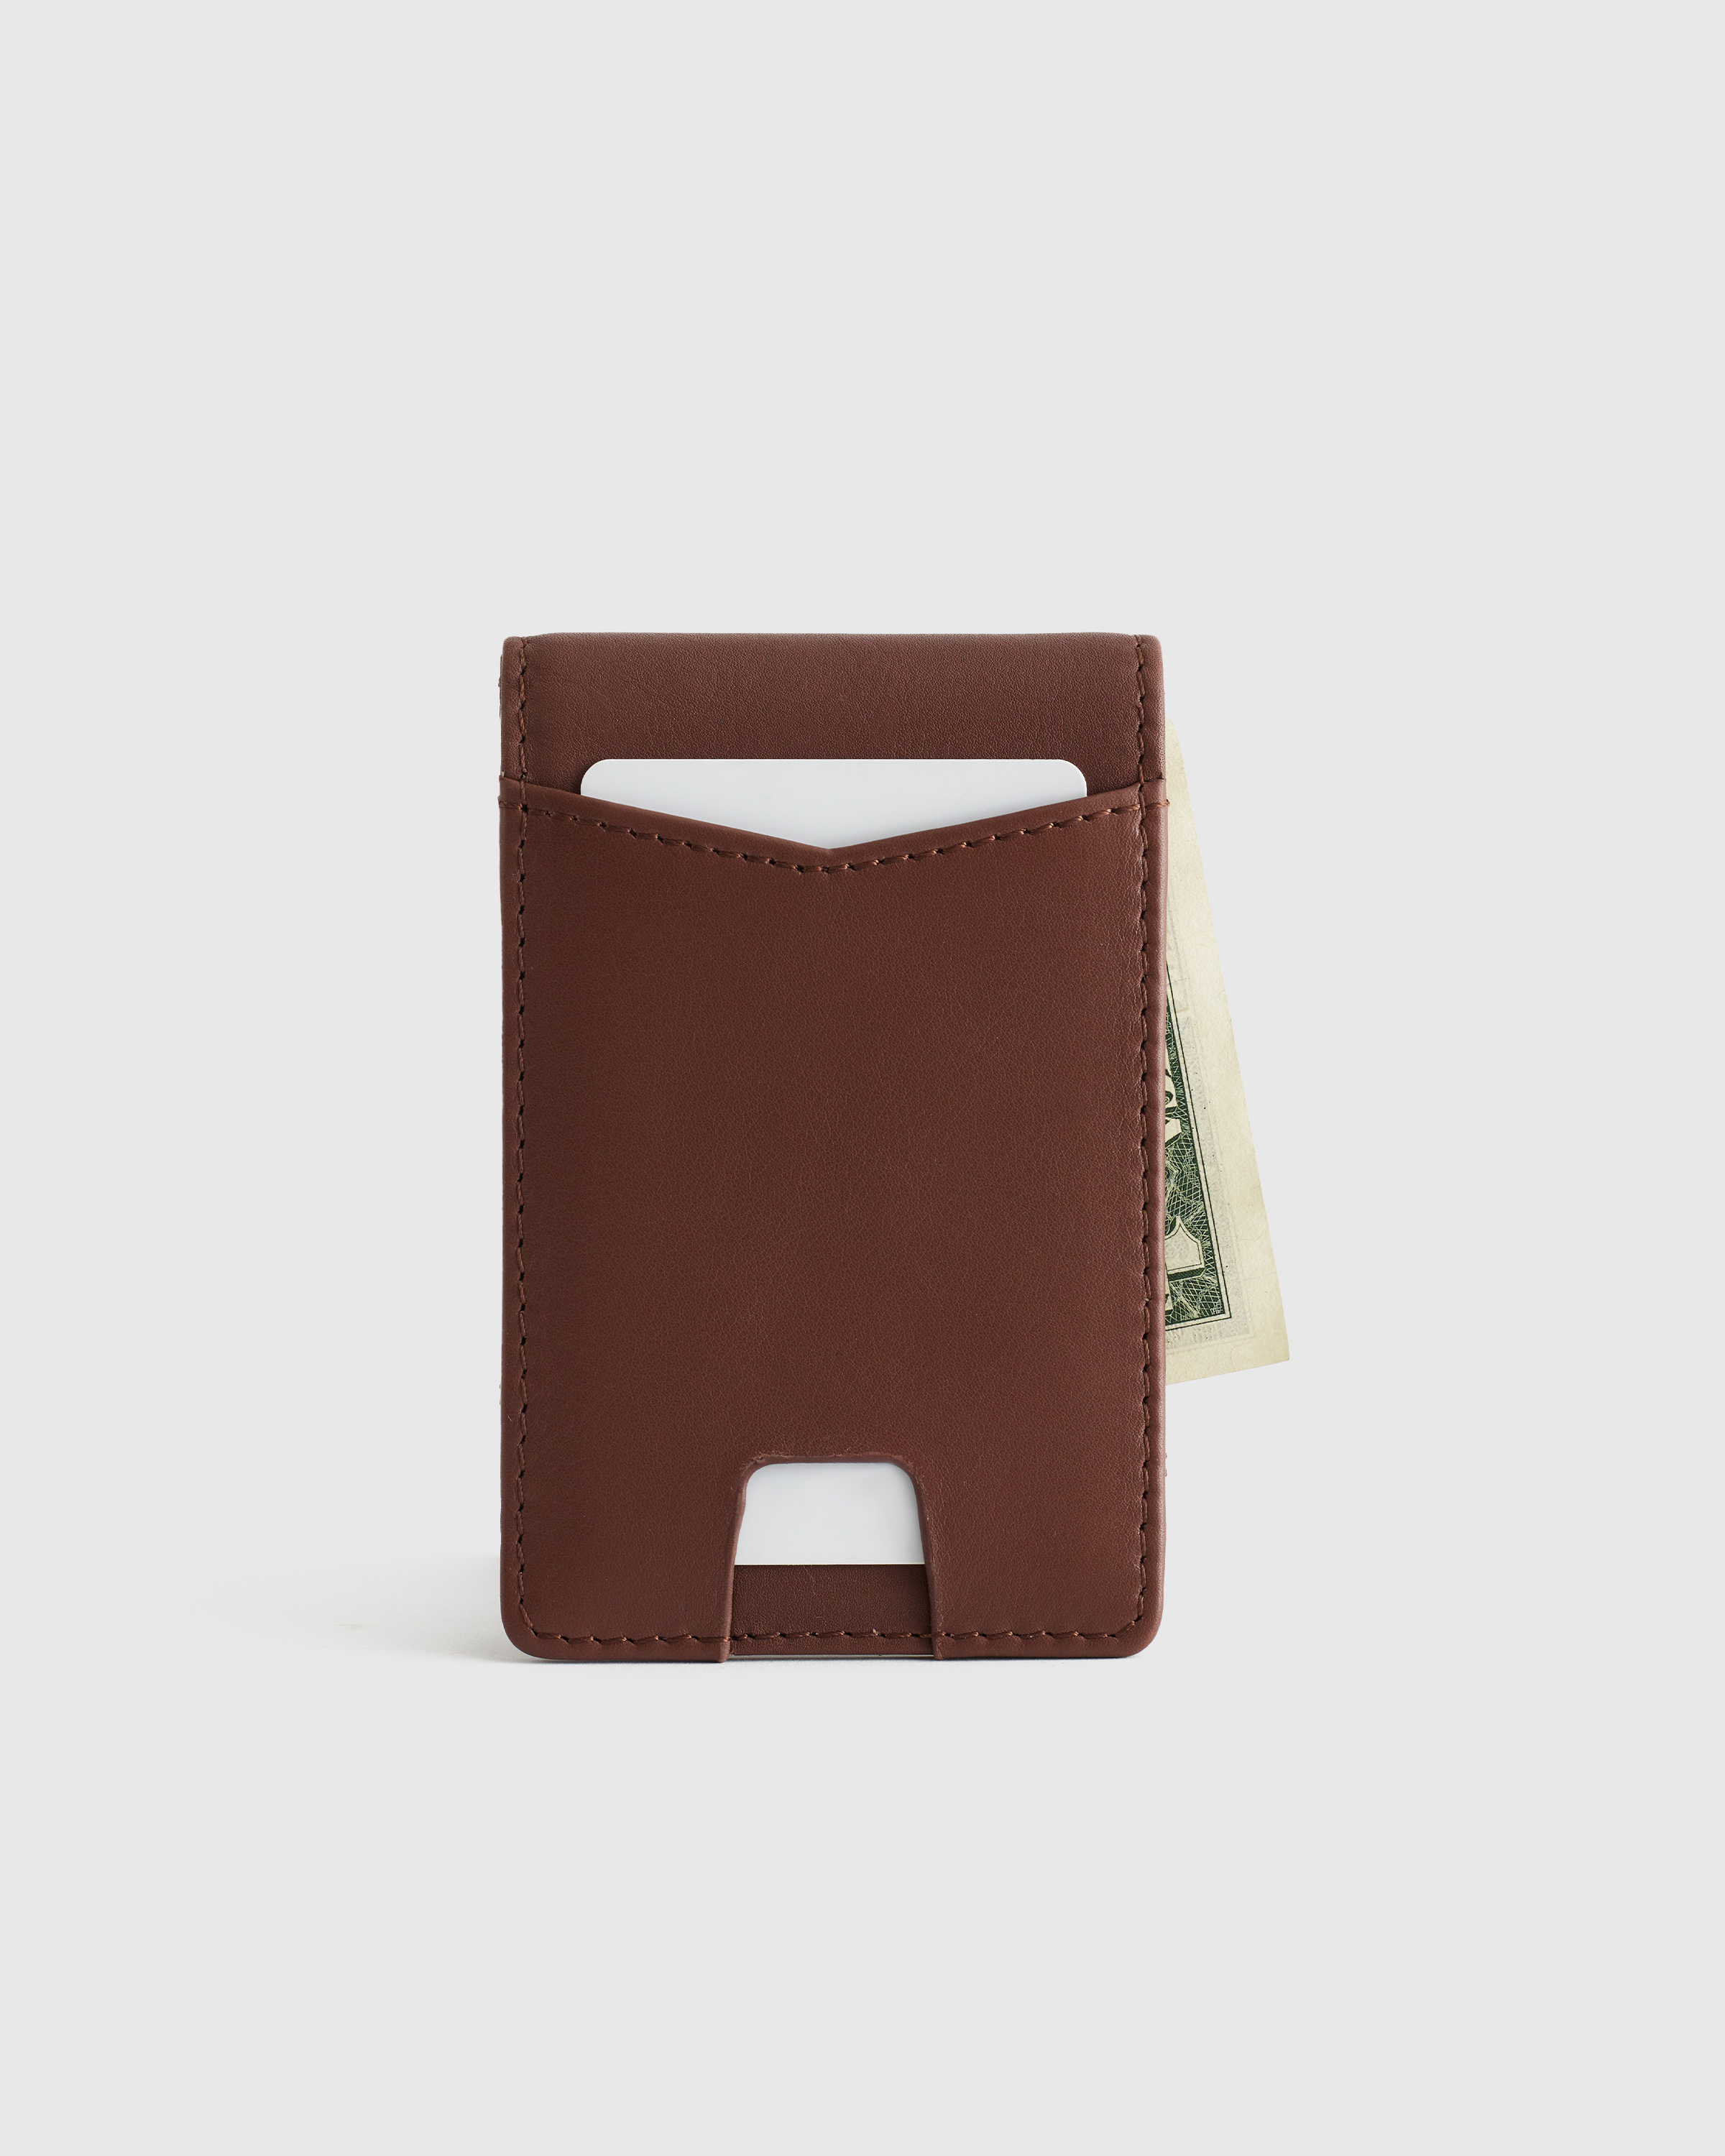 Black wallet with money clip made of genuine Italian leather!